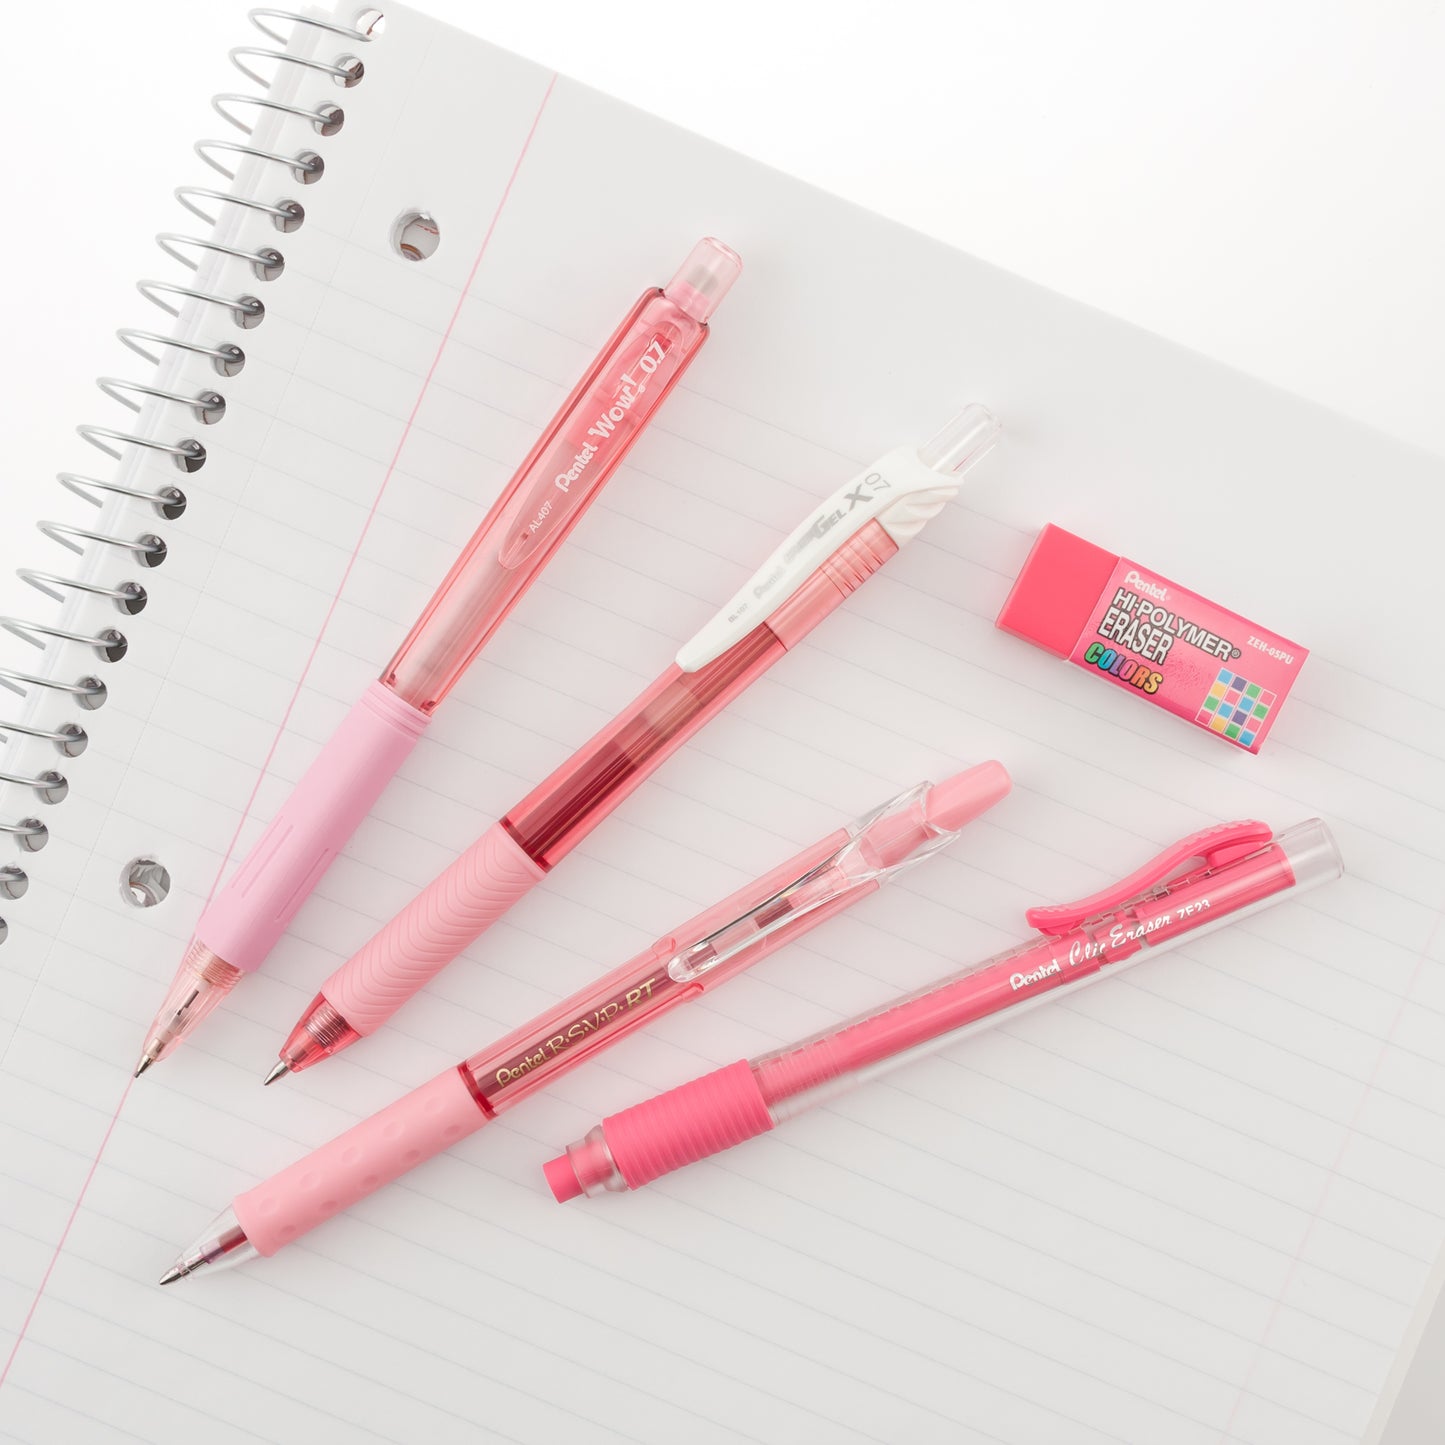 Color Shades Writing Pack - Pastel Pink – Pentel of America, Ltd.